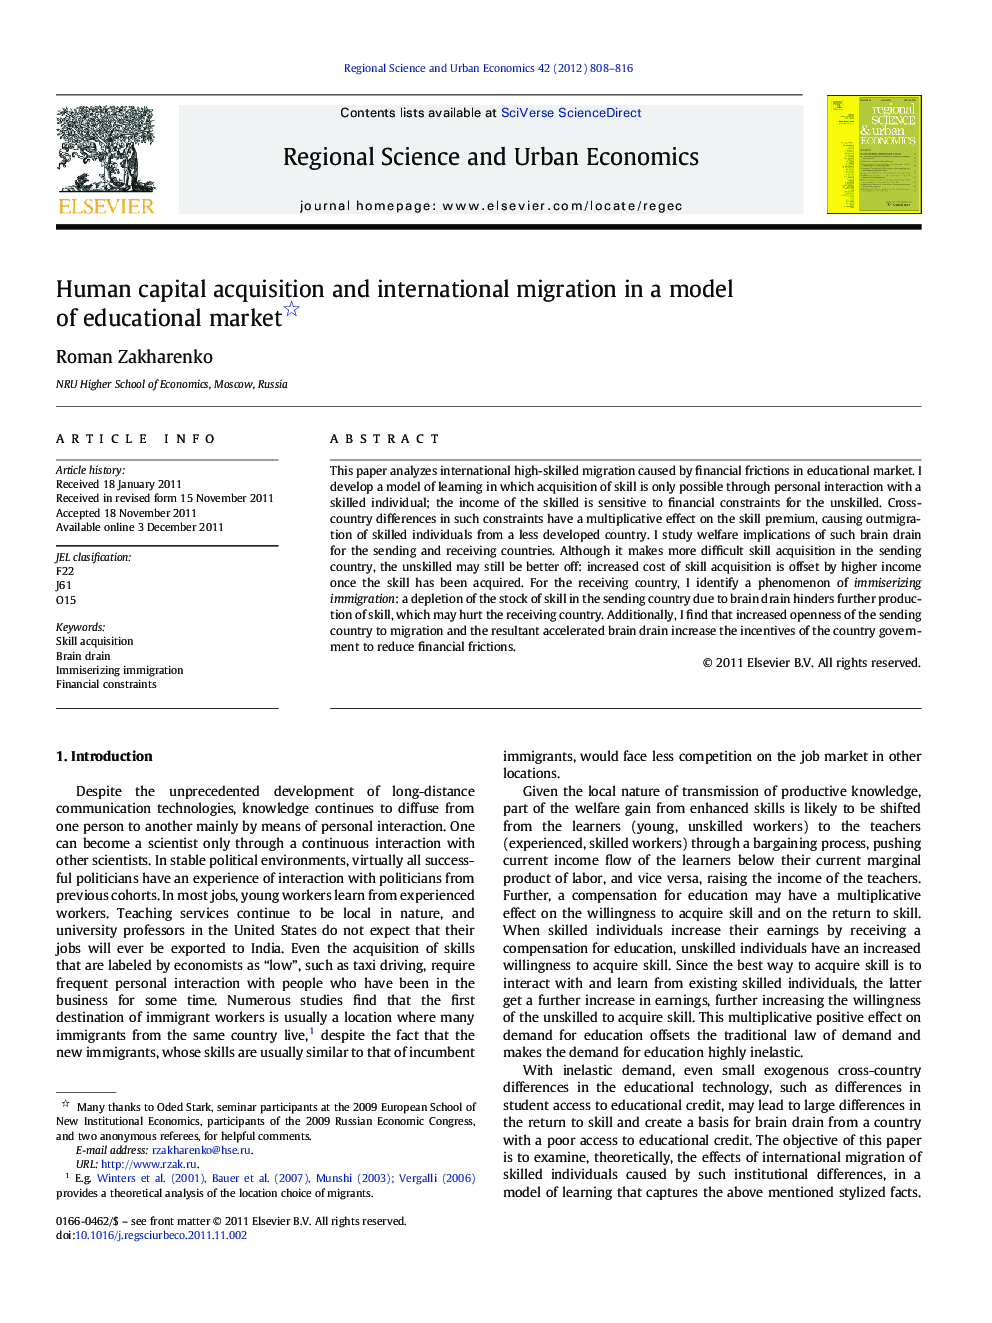 Human capital acquisition and international migration in a model of educational market 